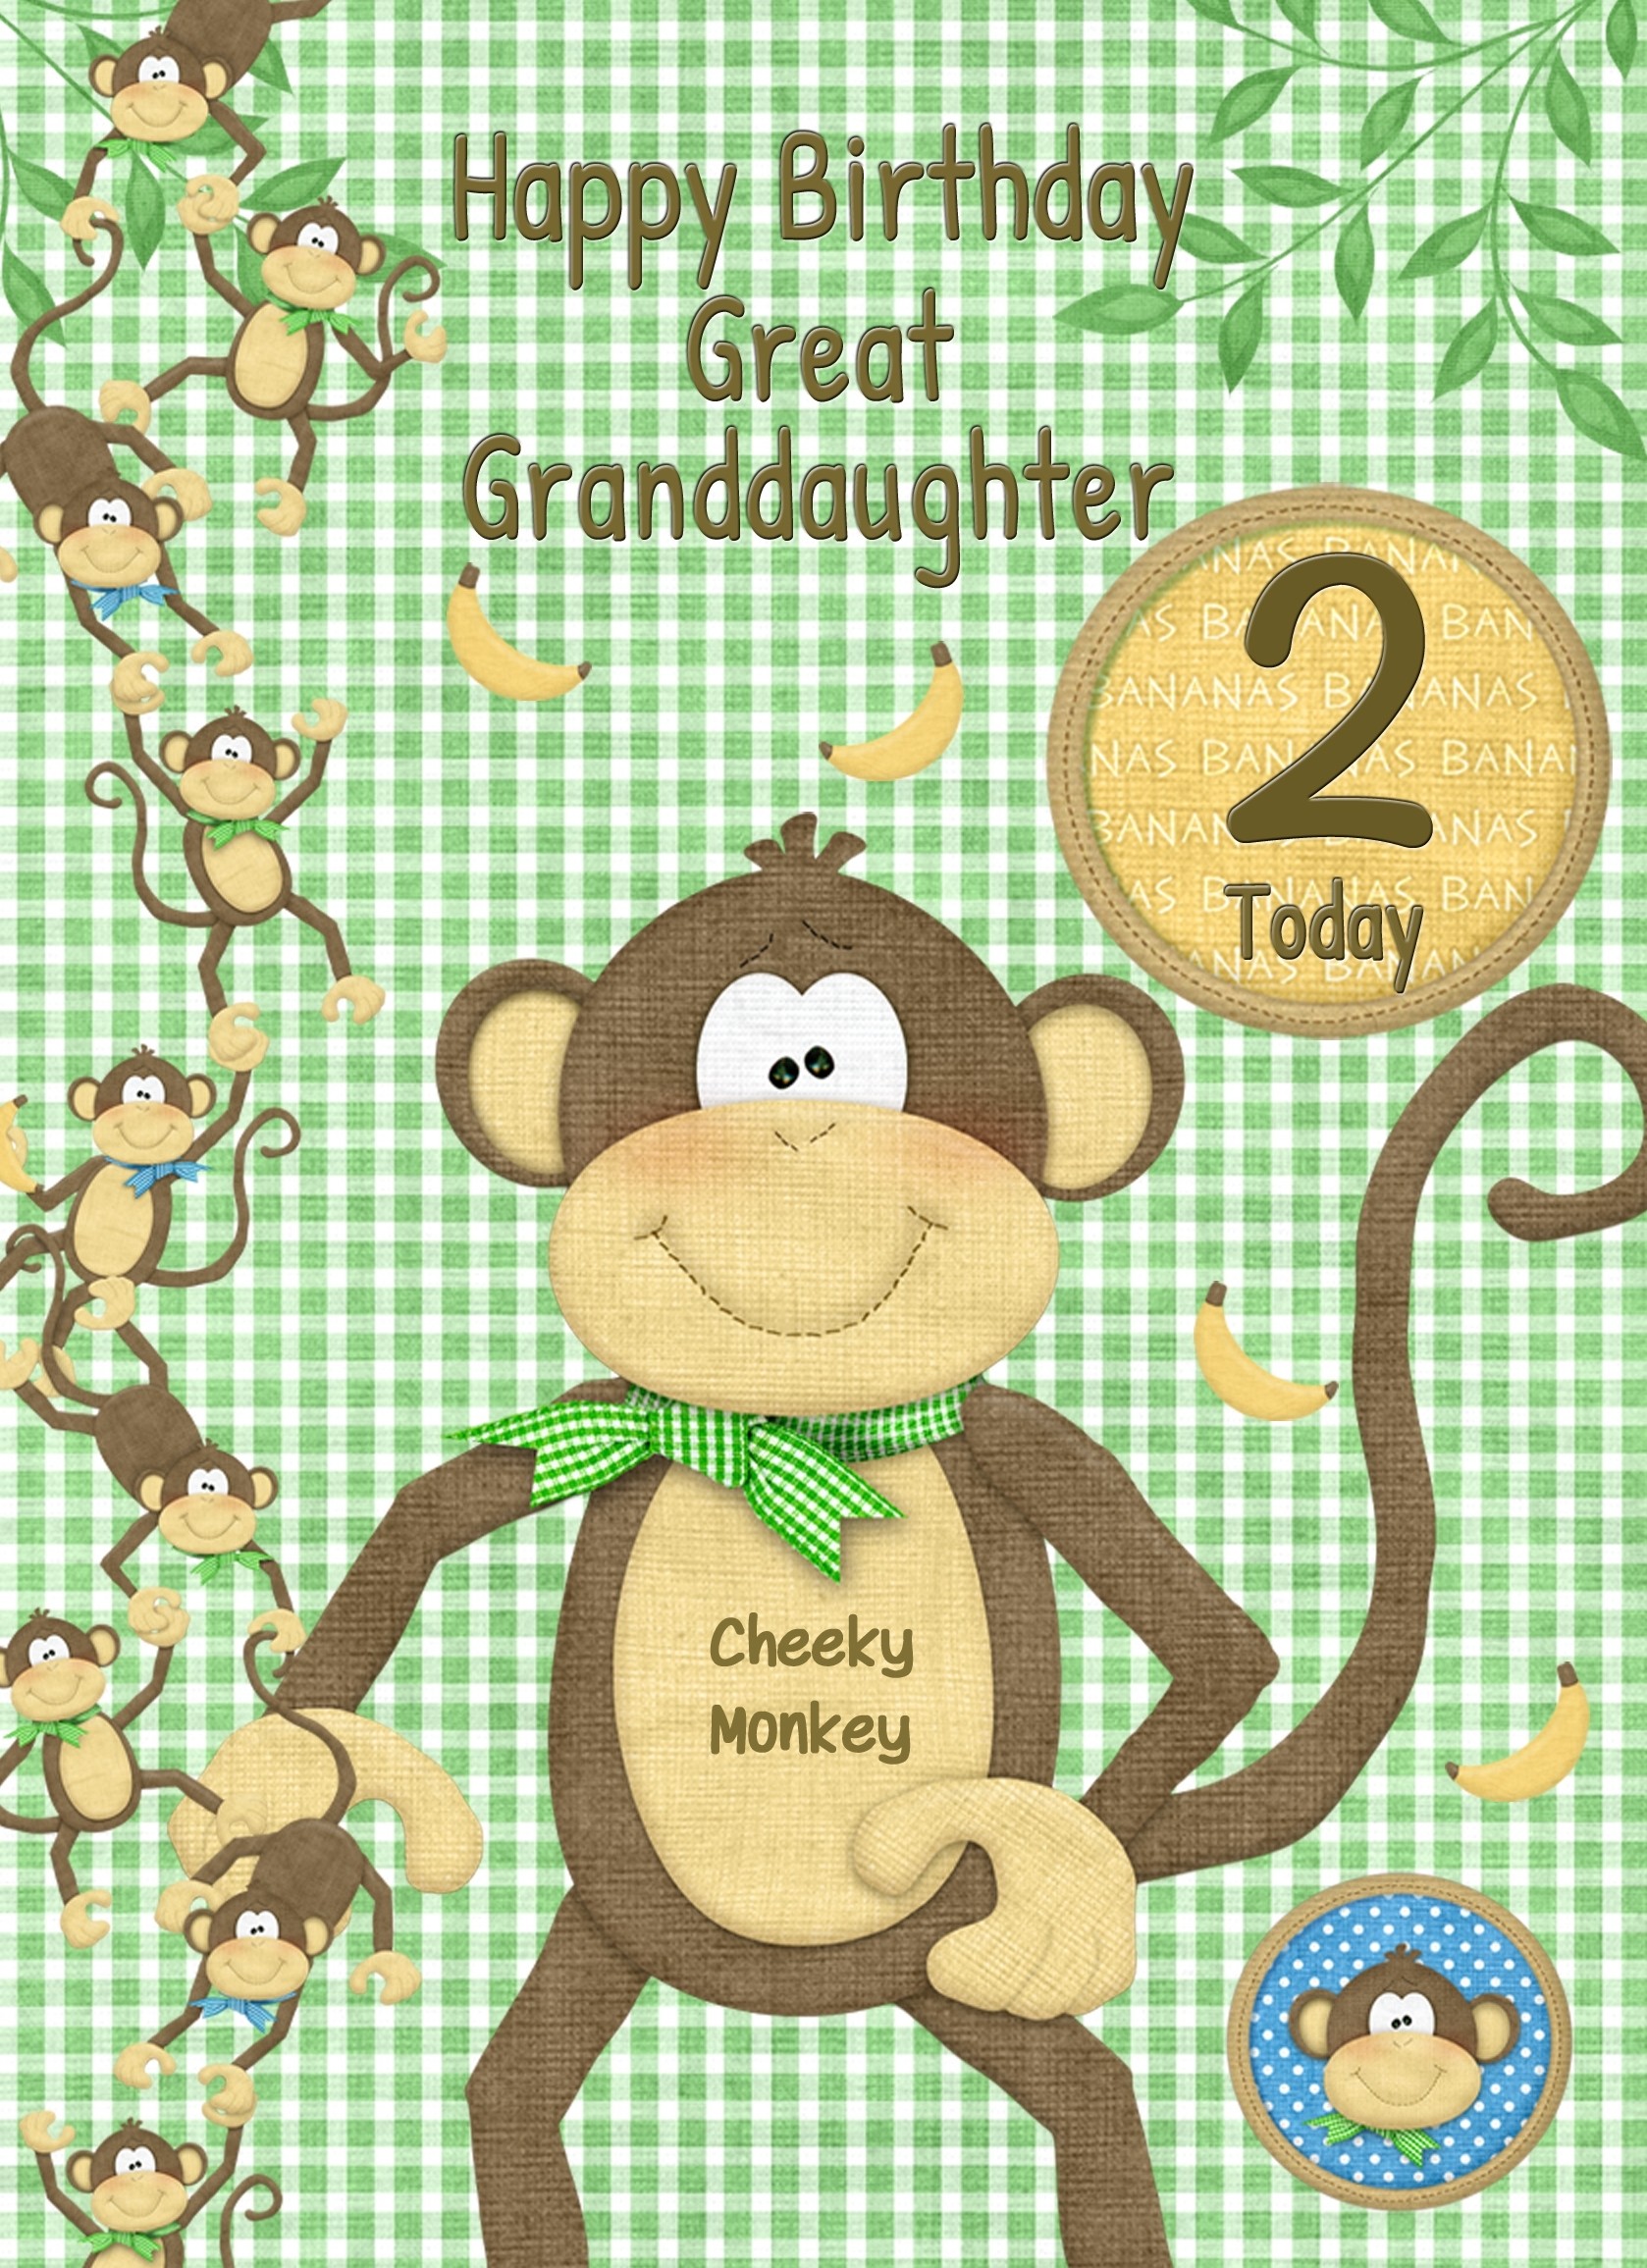 Kids 2nd Birthday Cheeky Monkey Cartoon Card for Great Granddaughter